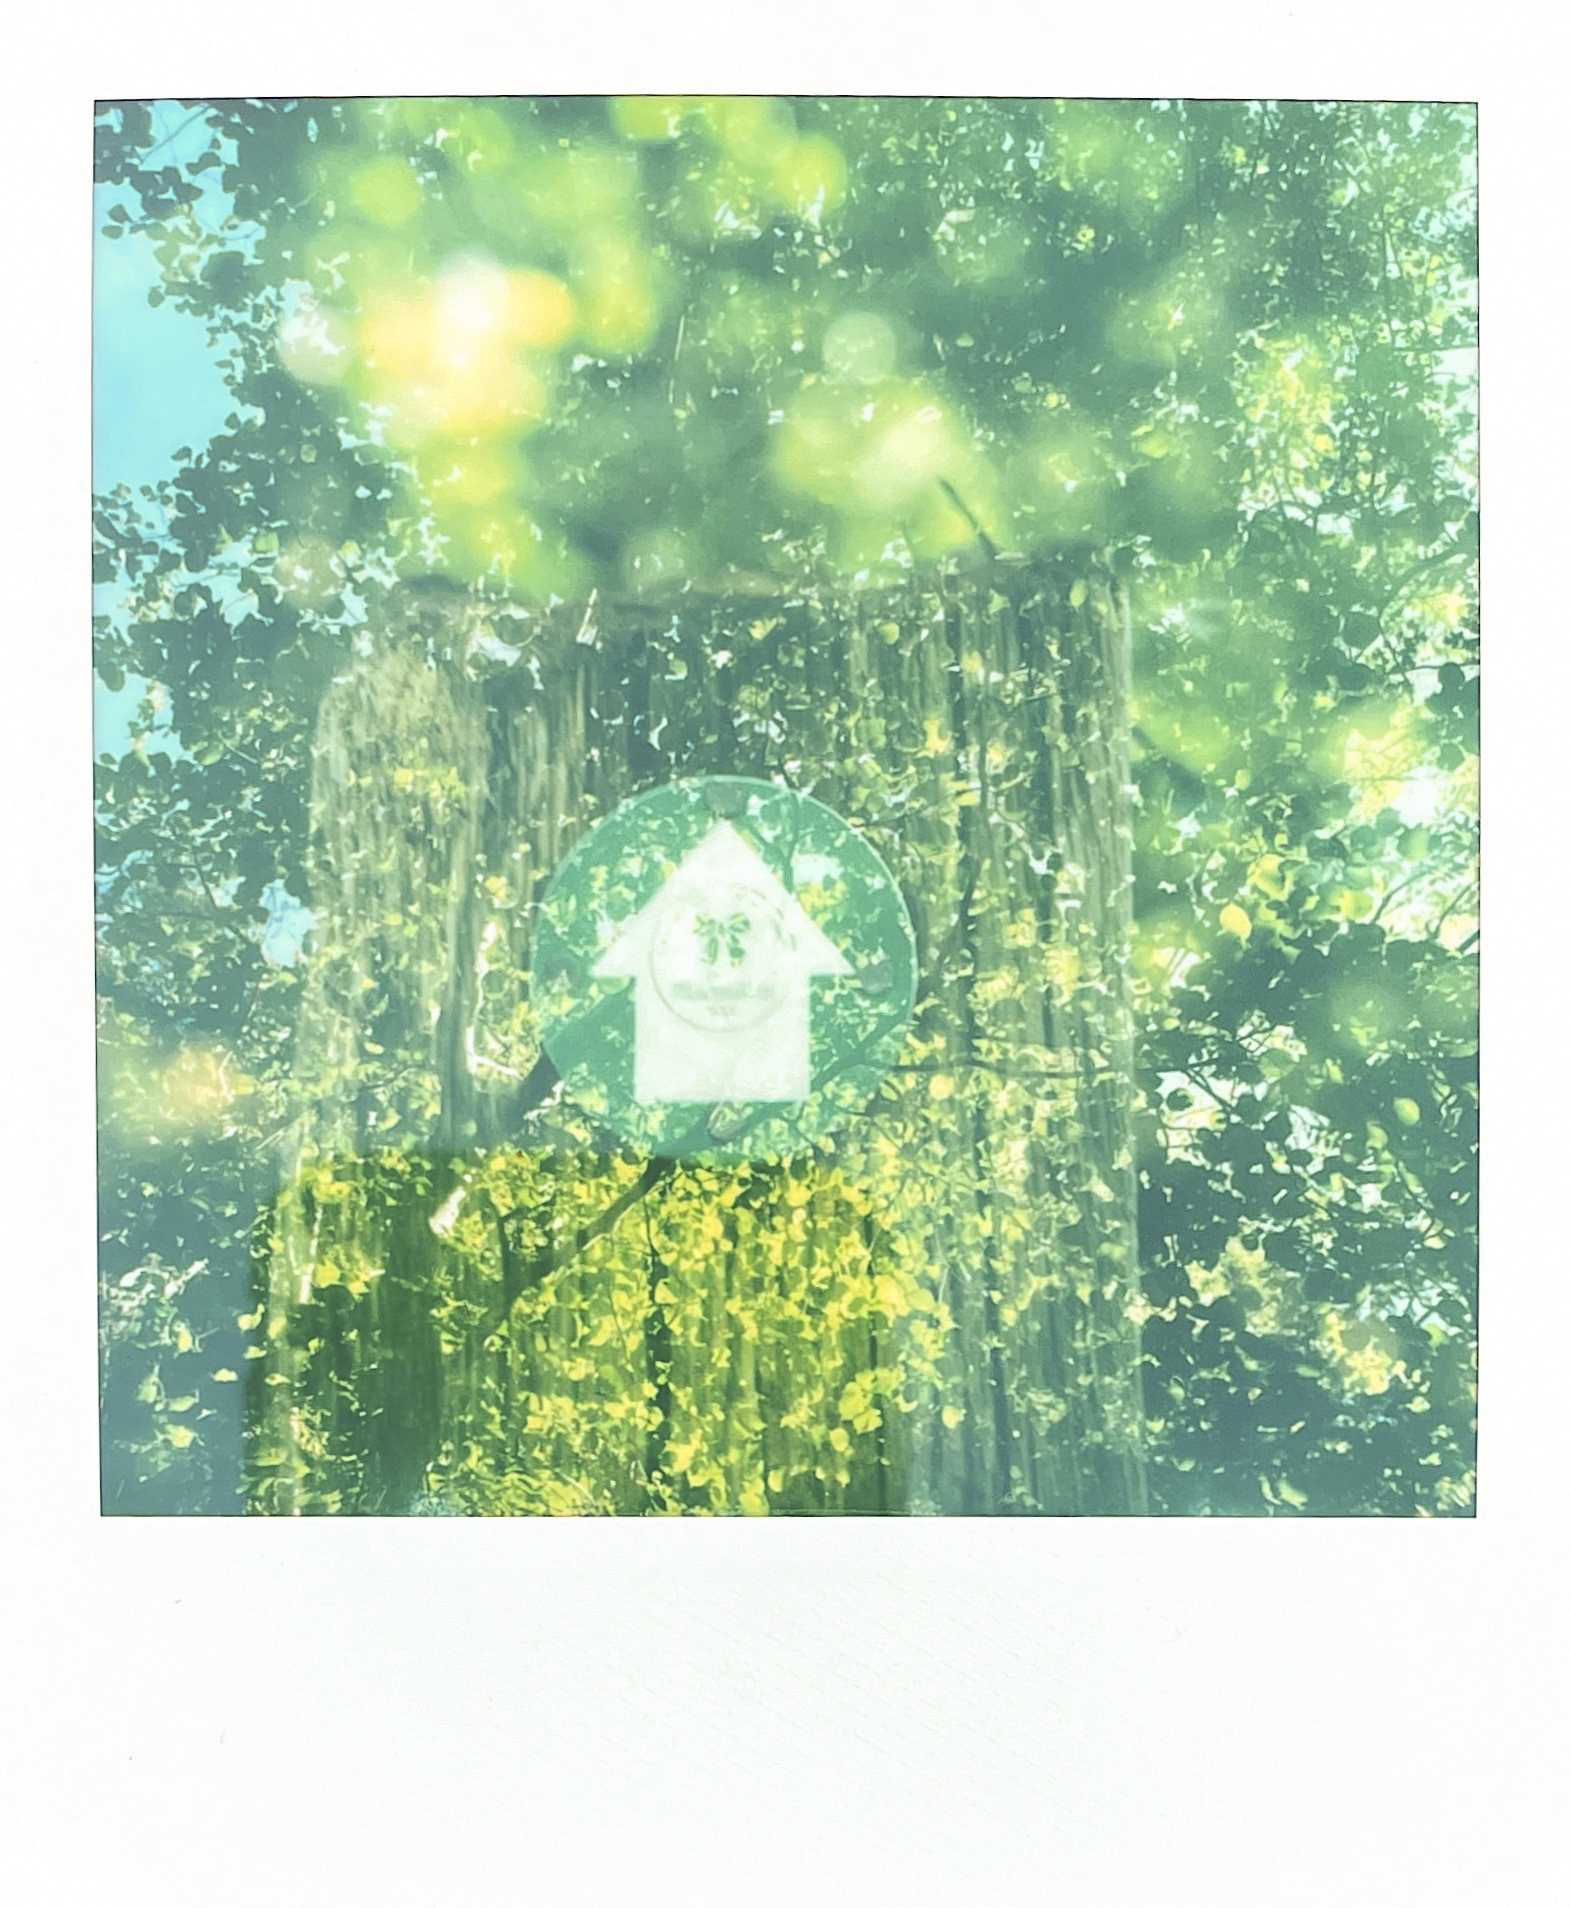 You can shoot up to four double exposures, and this is great fun